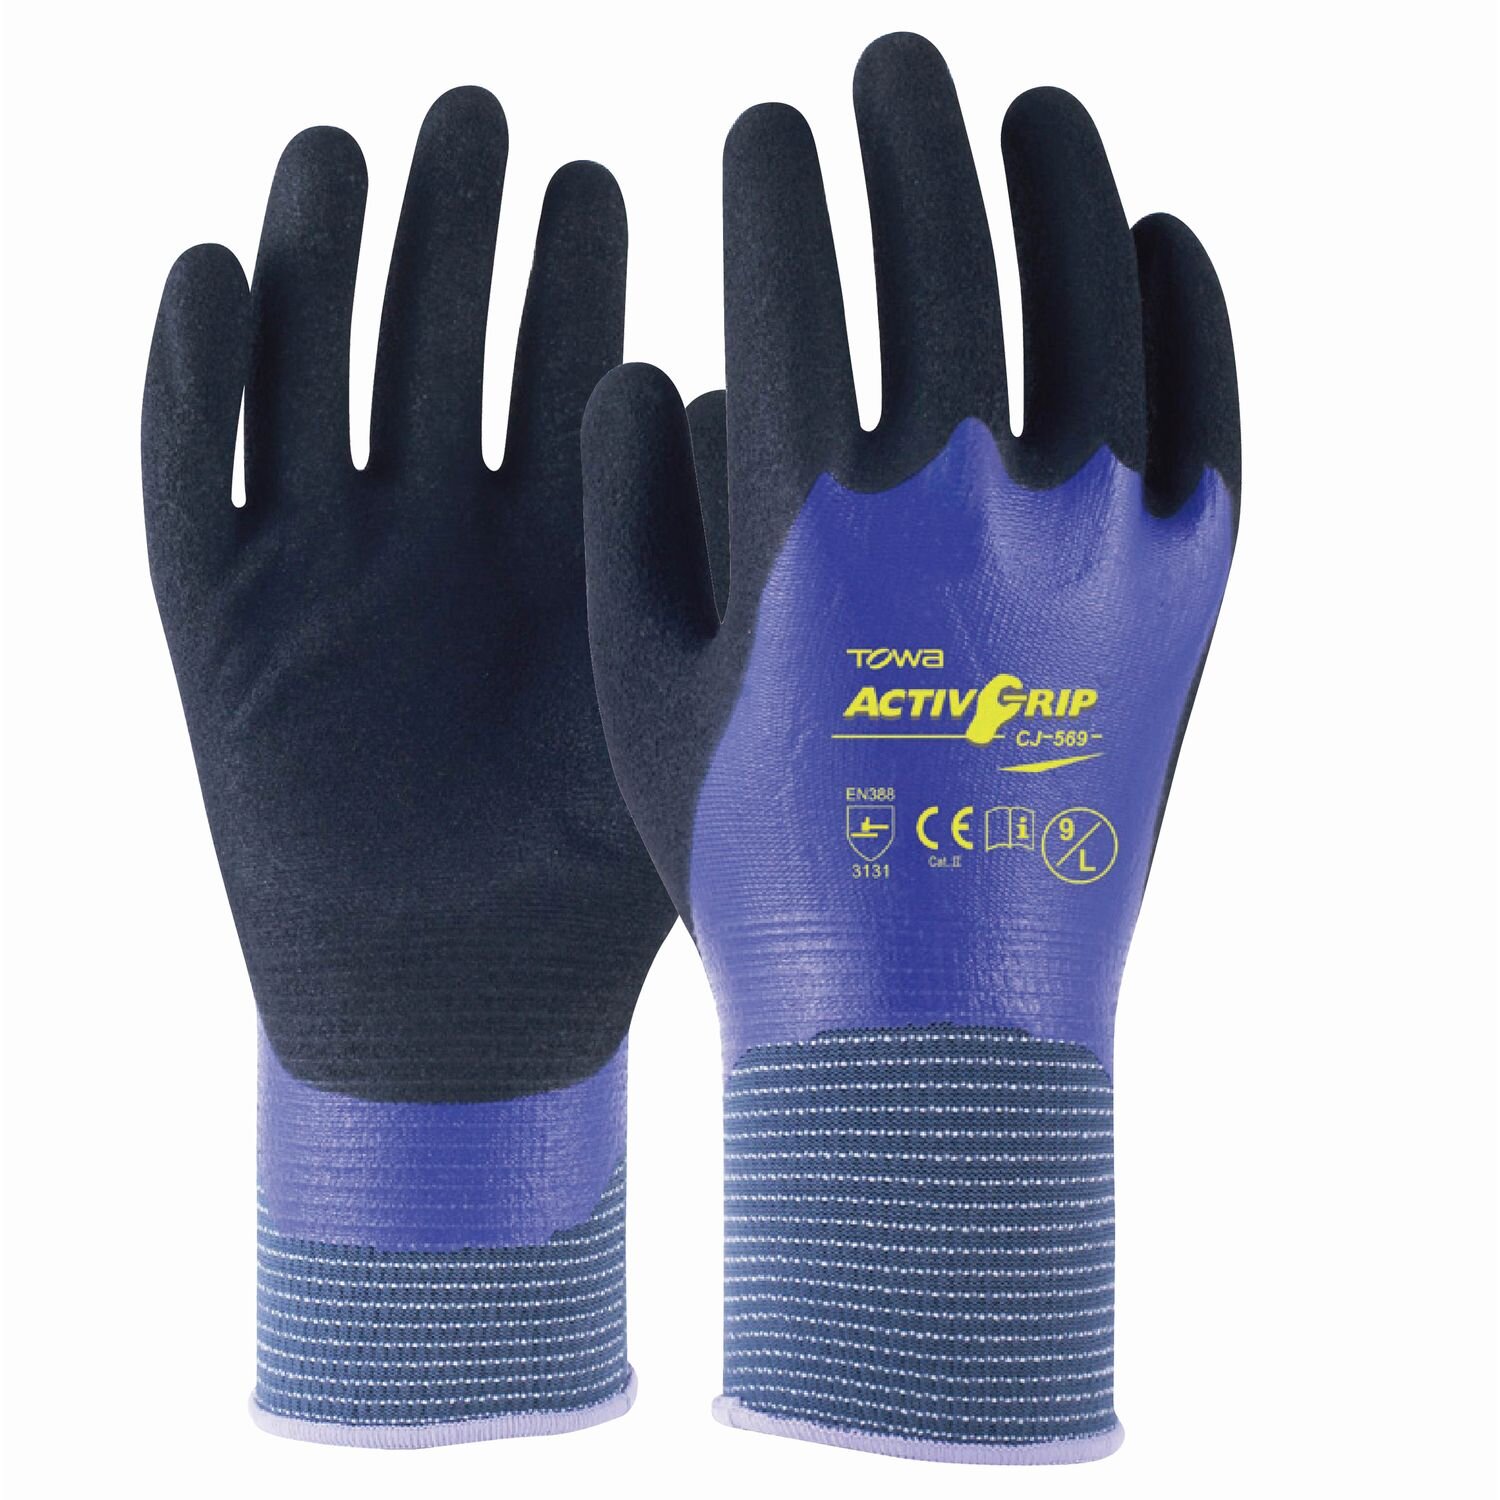 ActivGrip 569 Double Layer Nitrile Full Dip Gloves Pkt (12)